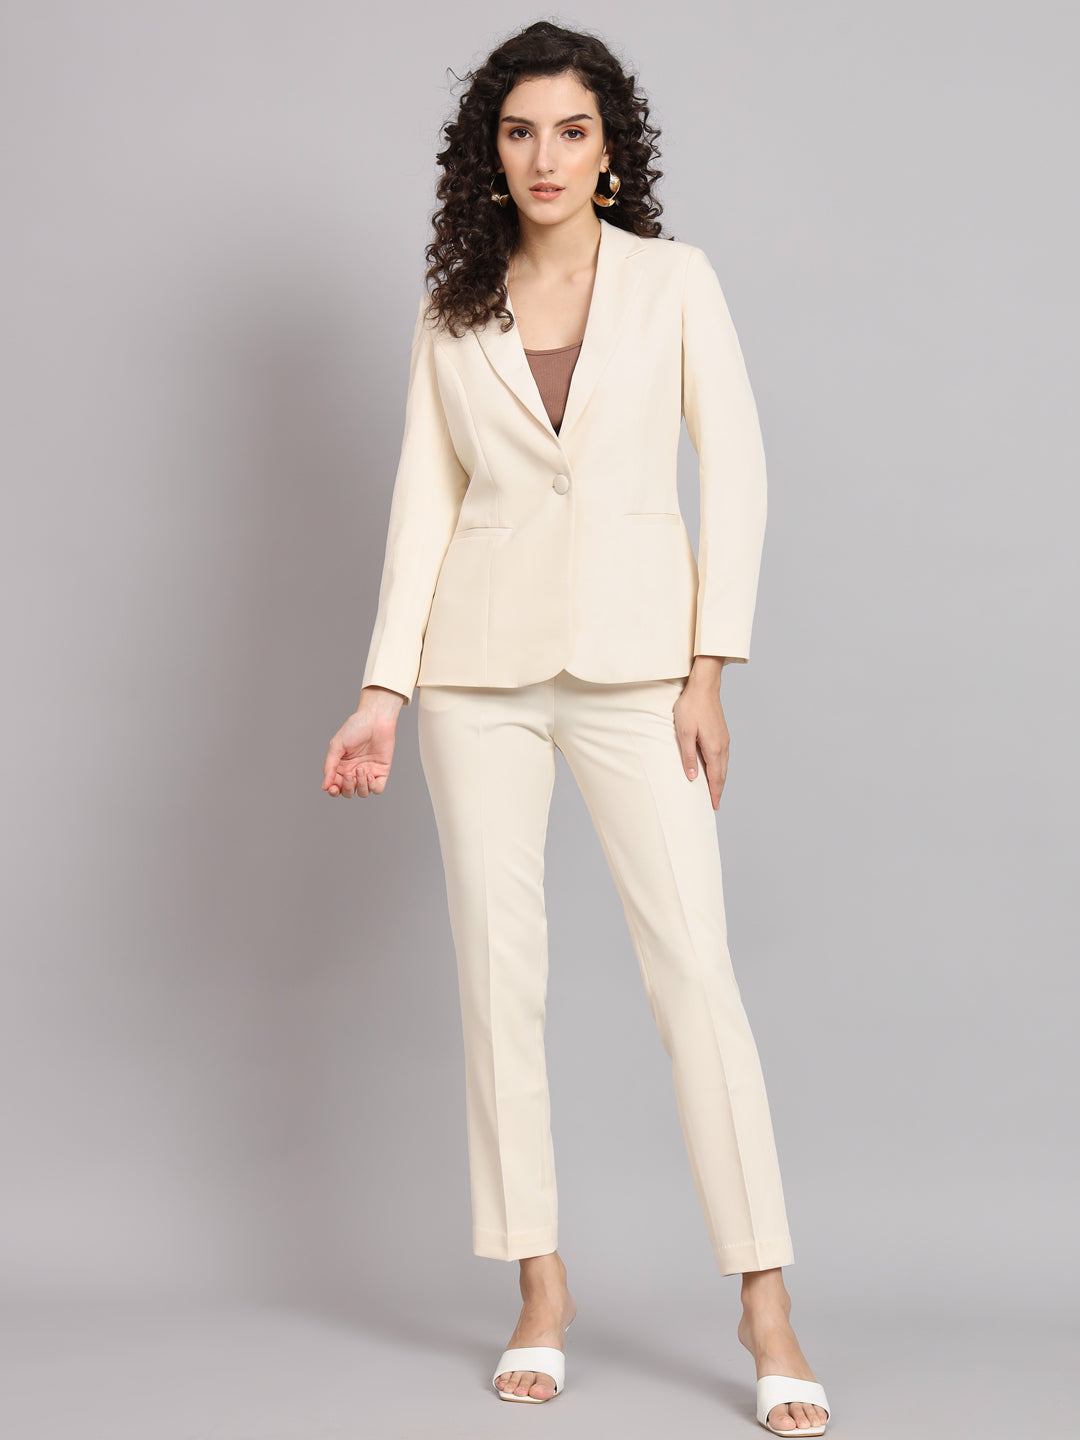 Buy PANT SUITS Women, Double Breasted Women Suit Sky Blue, Dress Suit Women,  Business Suit Women, Women Tailored Suit, Two Piece Suit Women Online in  India - Et…